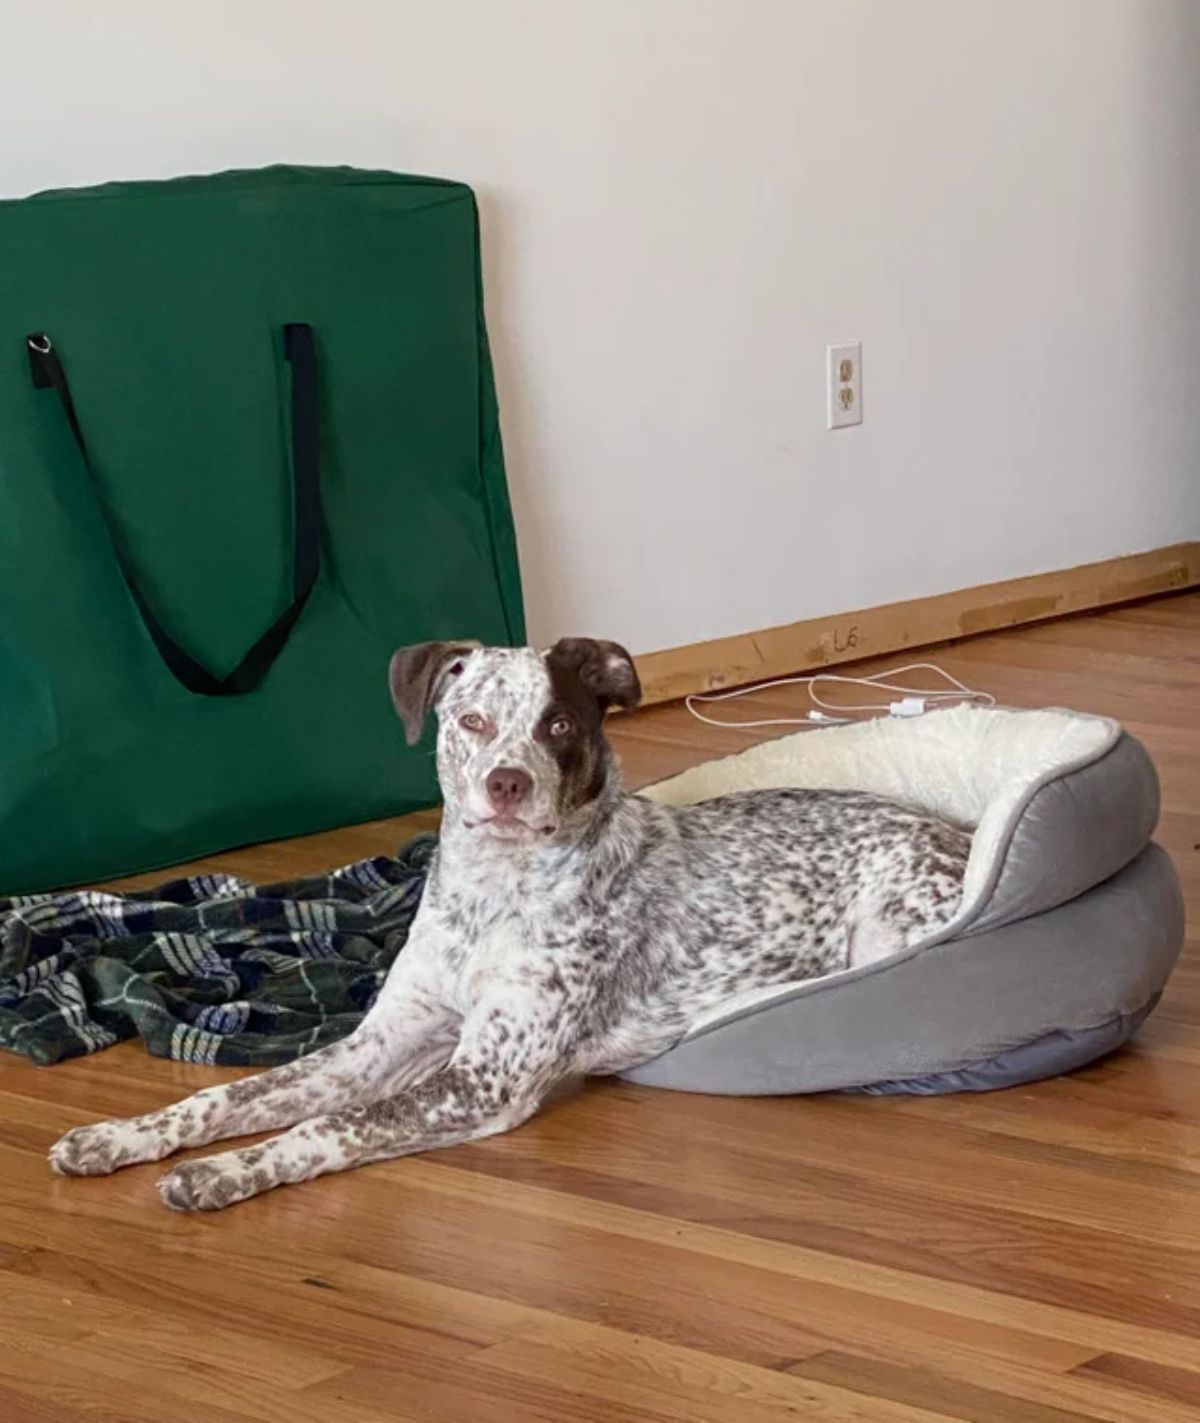 brown and white dog with brown spots laying halfway on a grey dog bed and on the floor